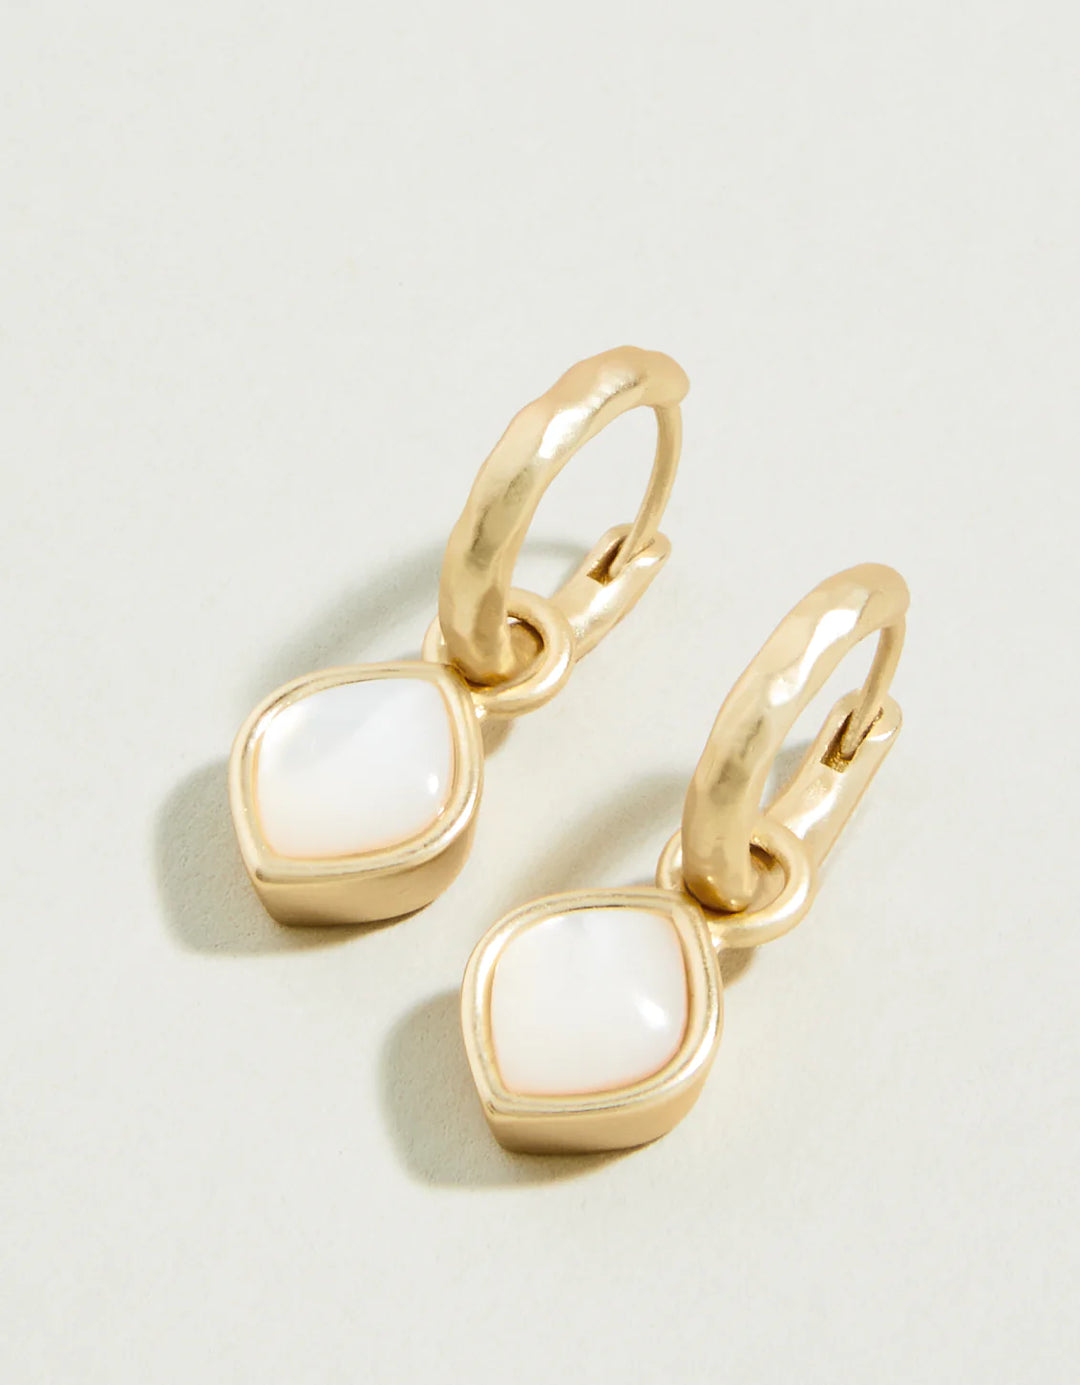 Maera Drop Earring in Mother of Pearl - Madison's Niche 